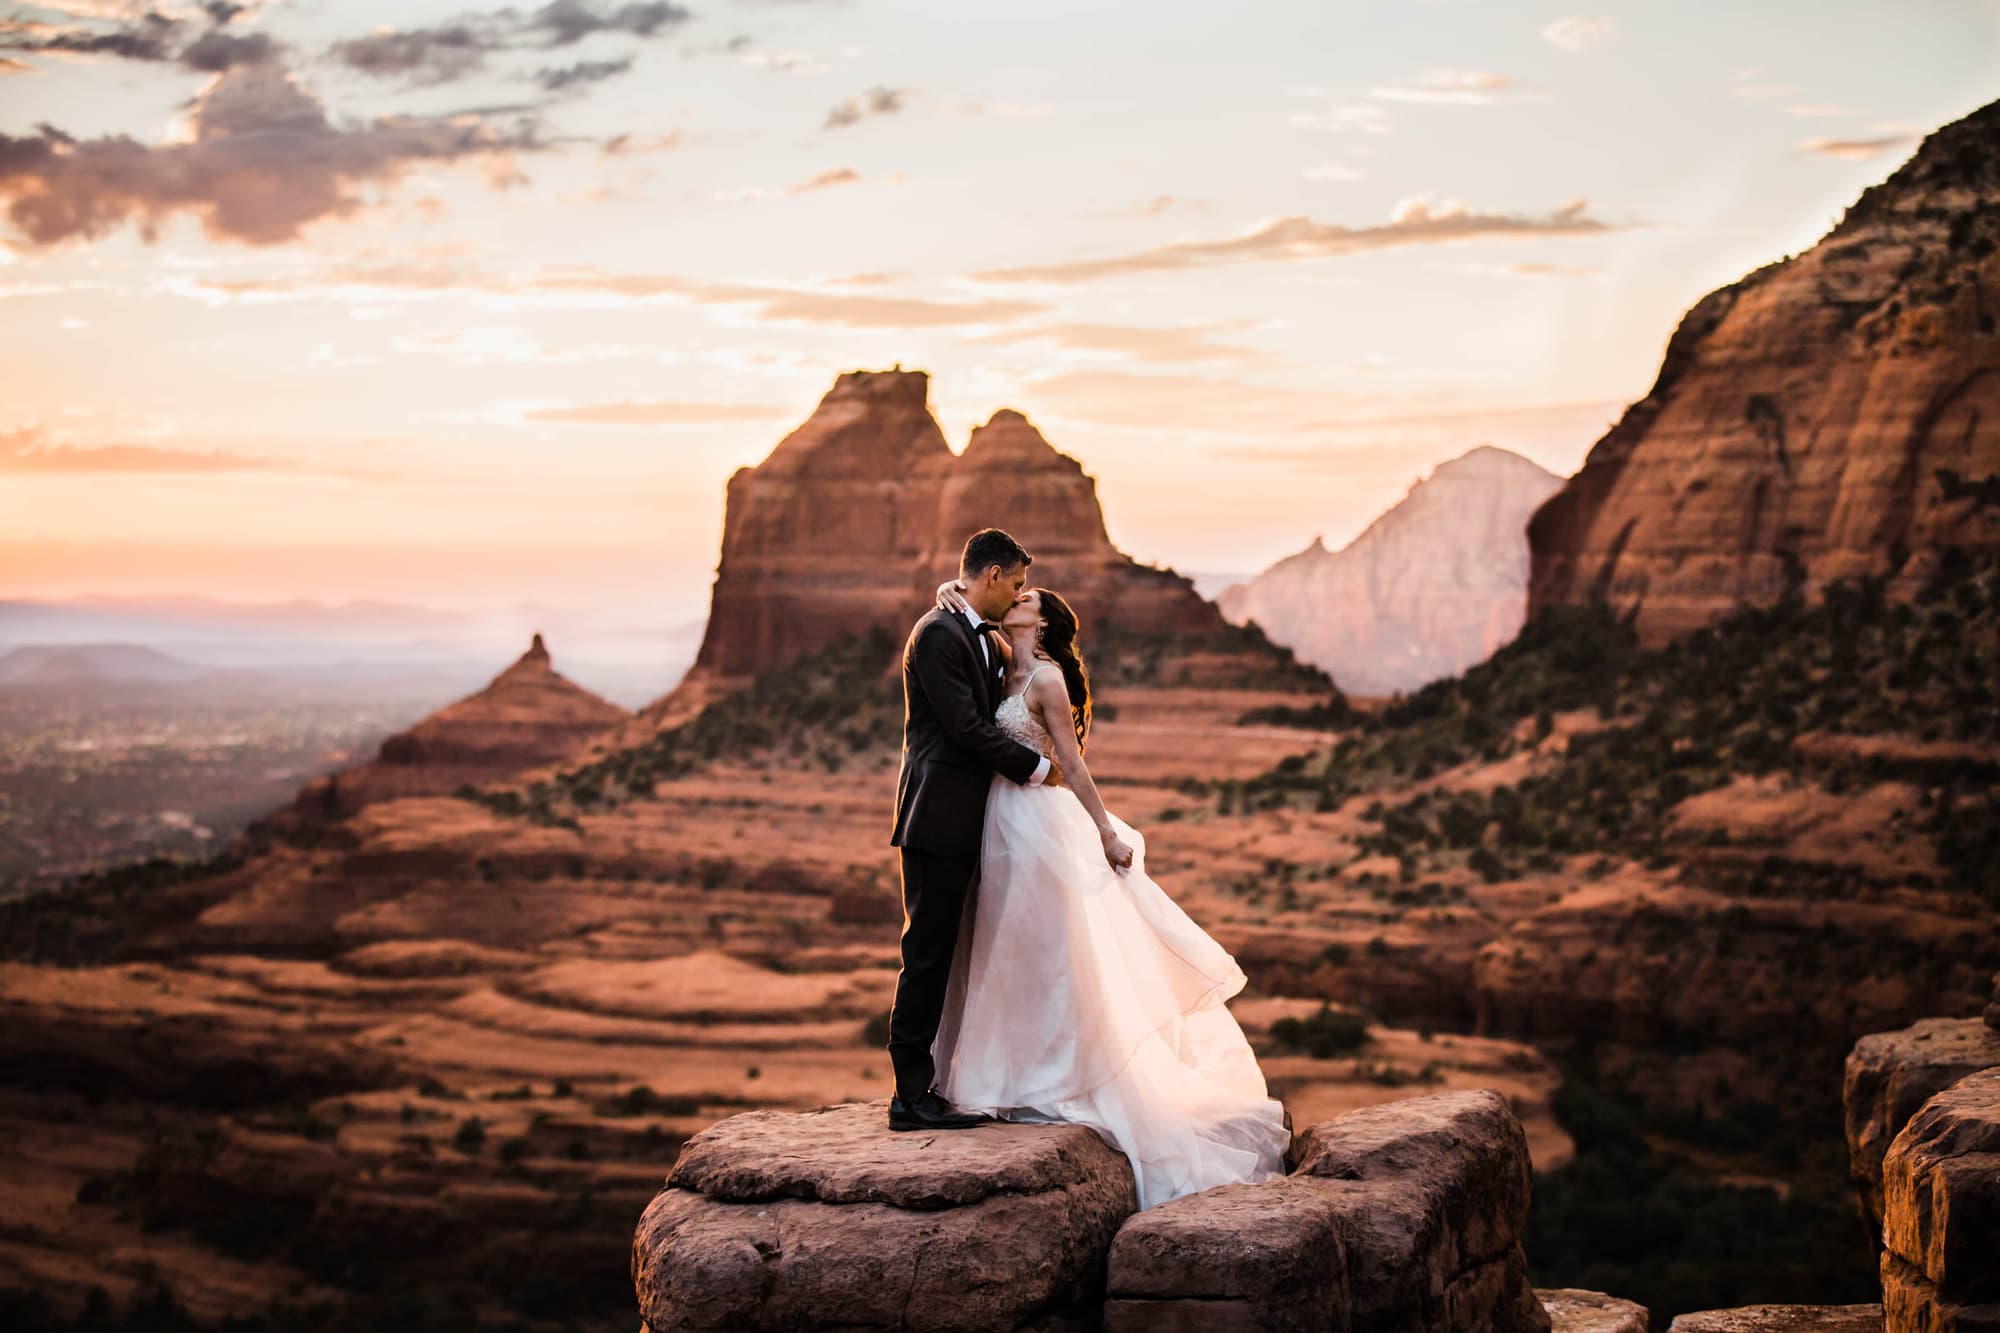 How To Elope in Sedona: Sedona Elopement Planning Guide | Aimee Flynn Photo